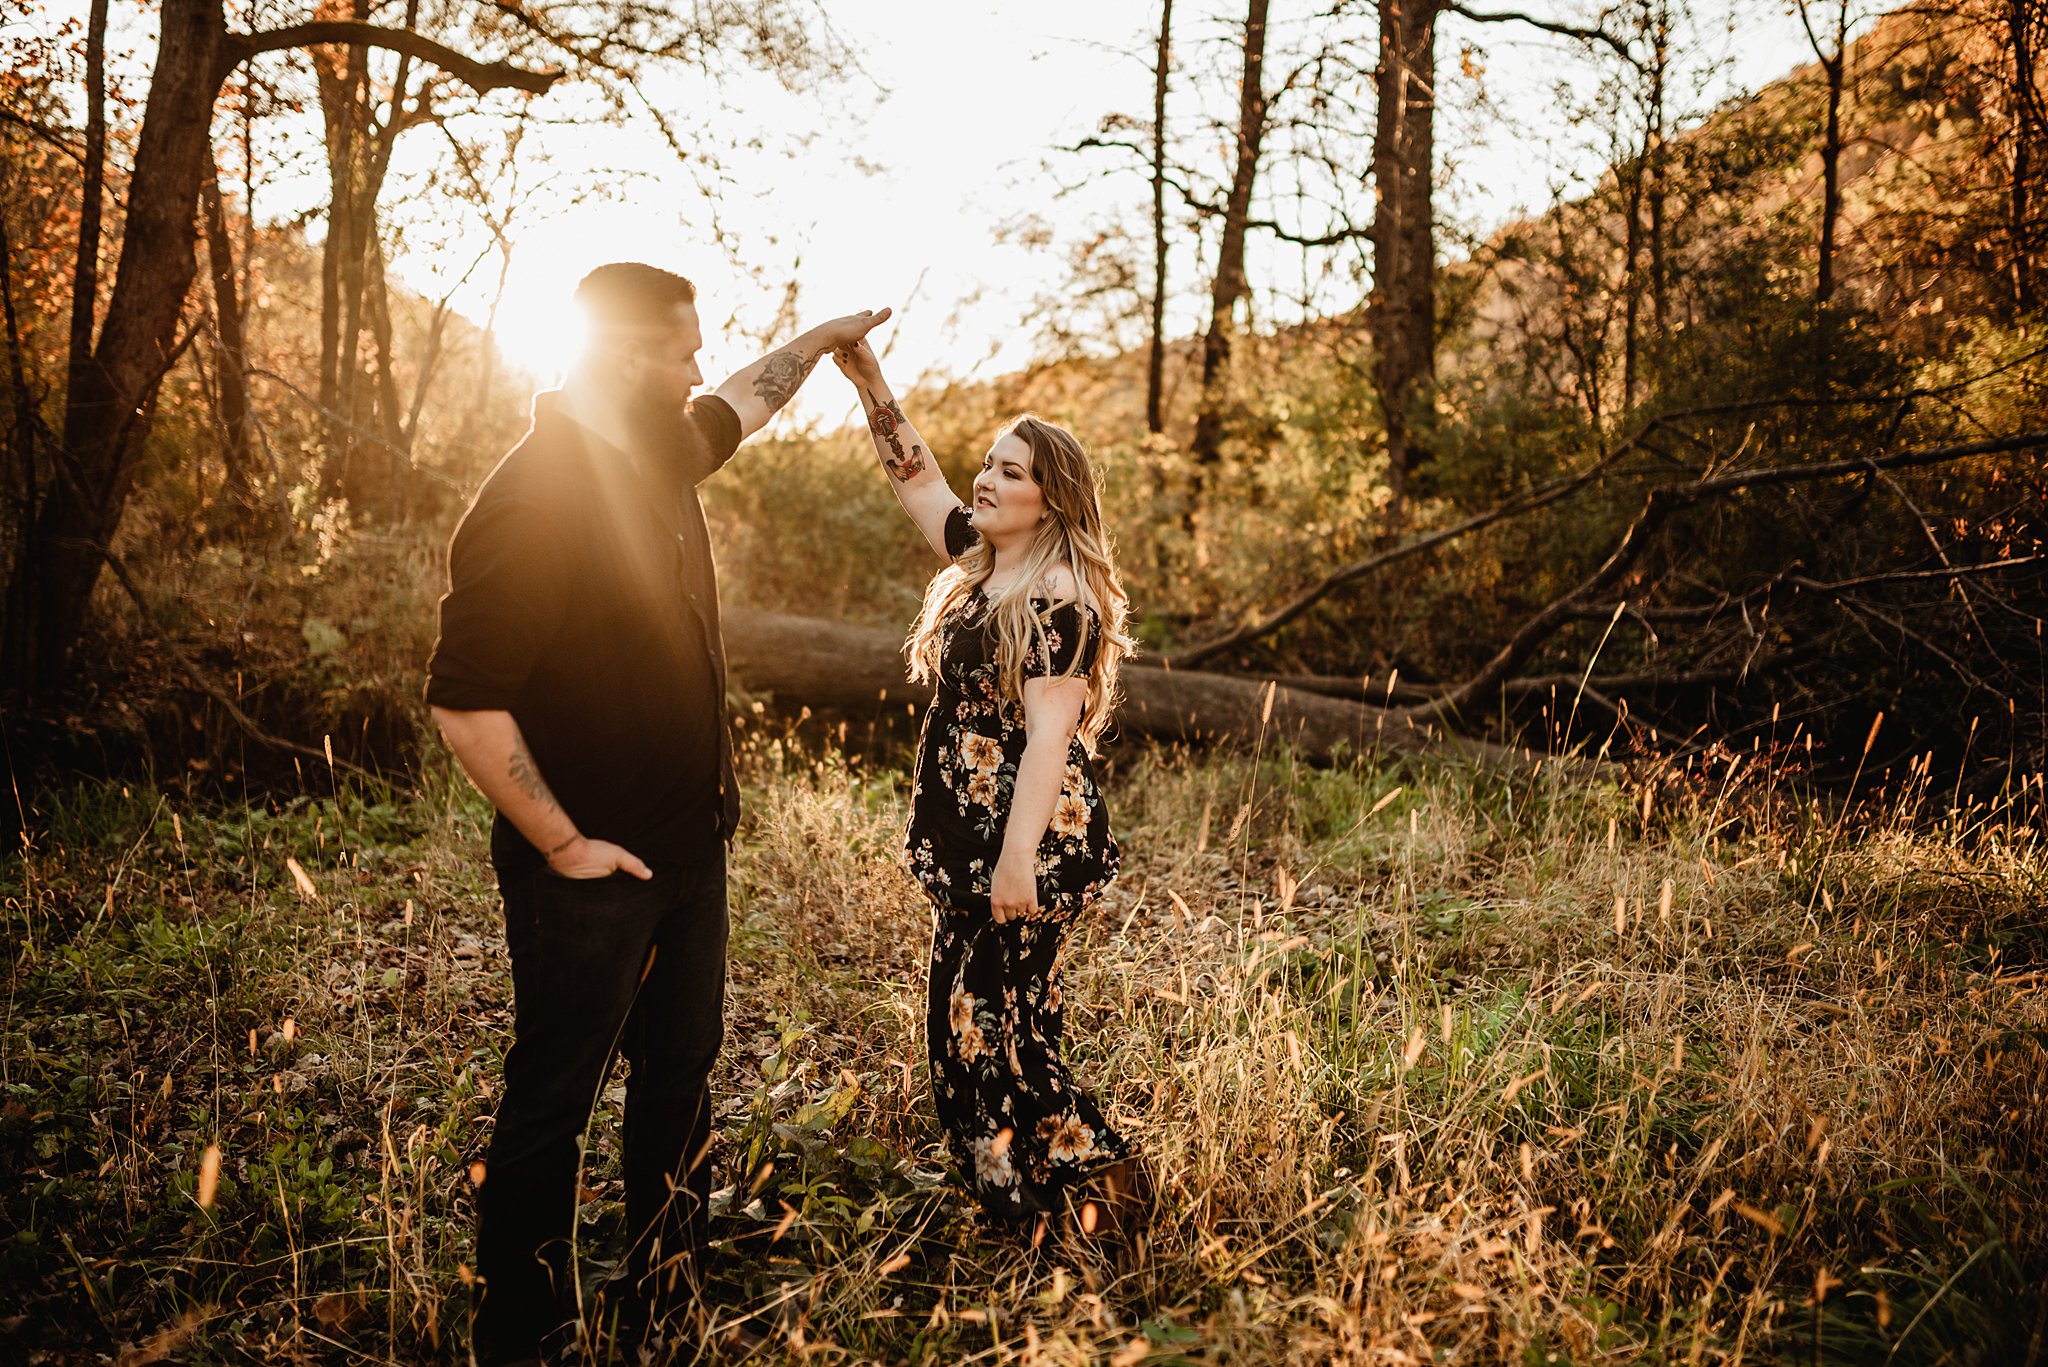 Unposed Engagement Session Tips: Capturing Your Love Story Naturally and Candidly